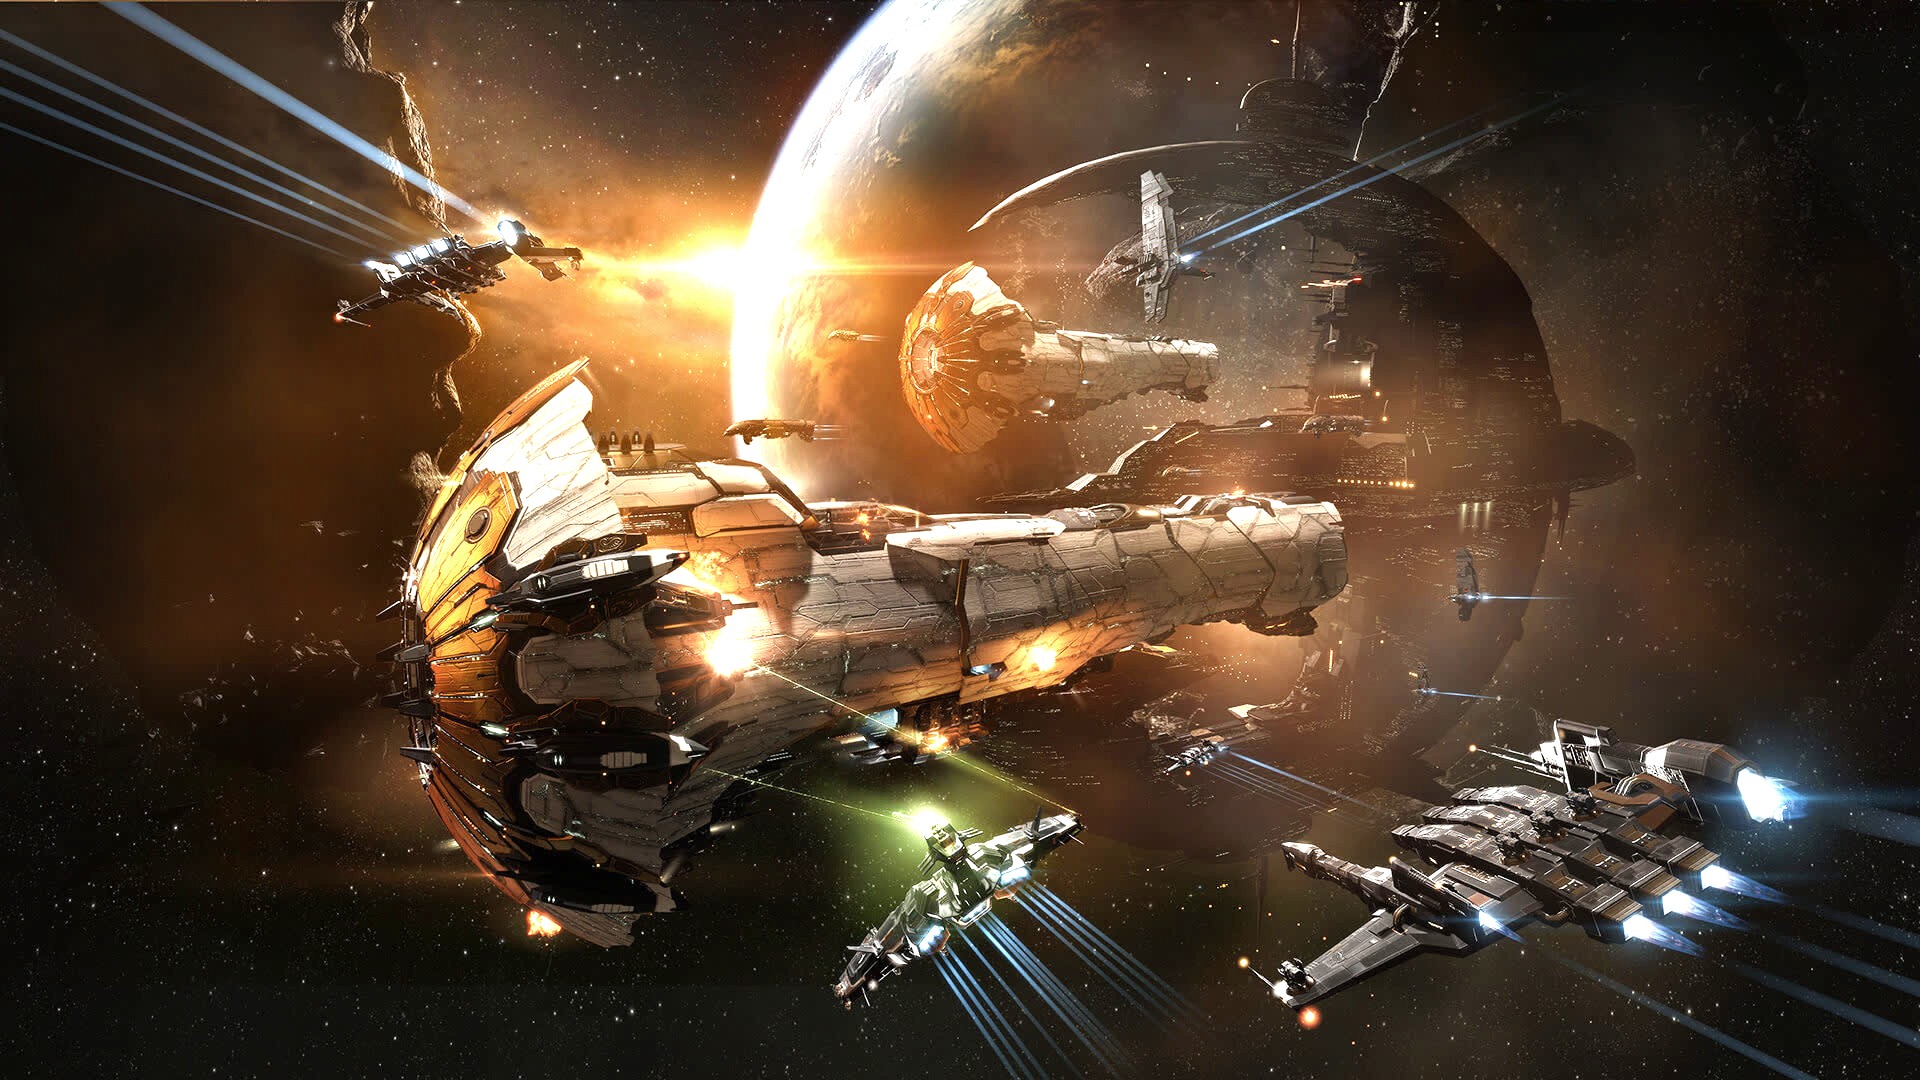 Eve Online will not adopt blockchain tech or NFTs for now